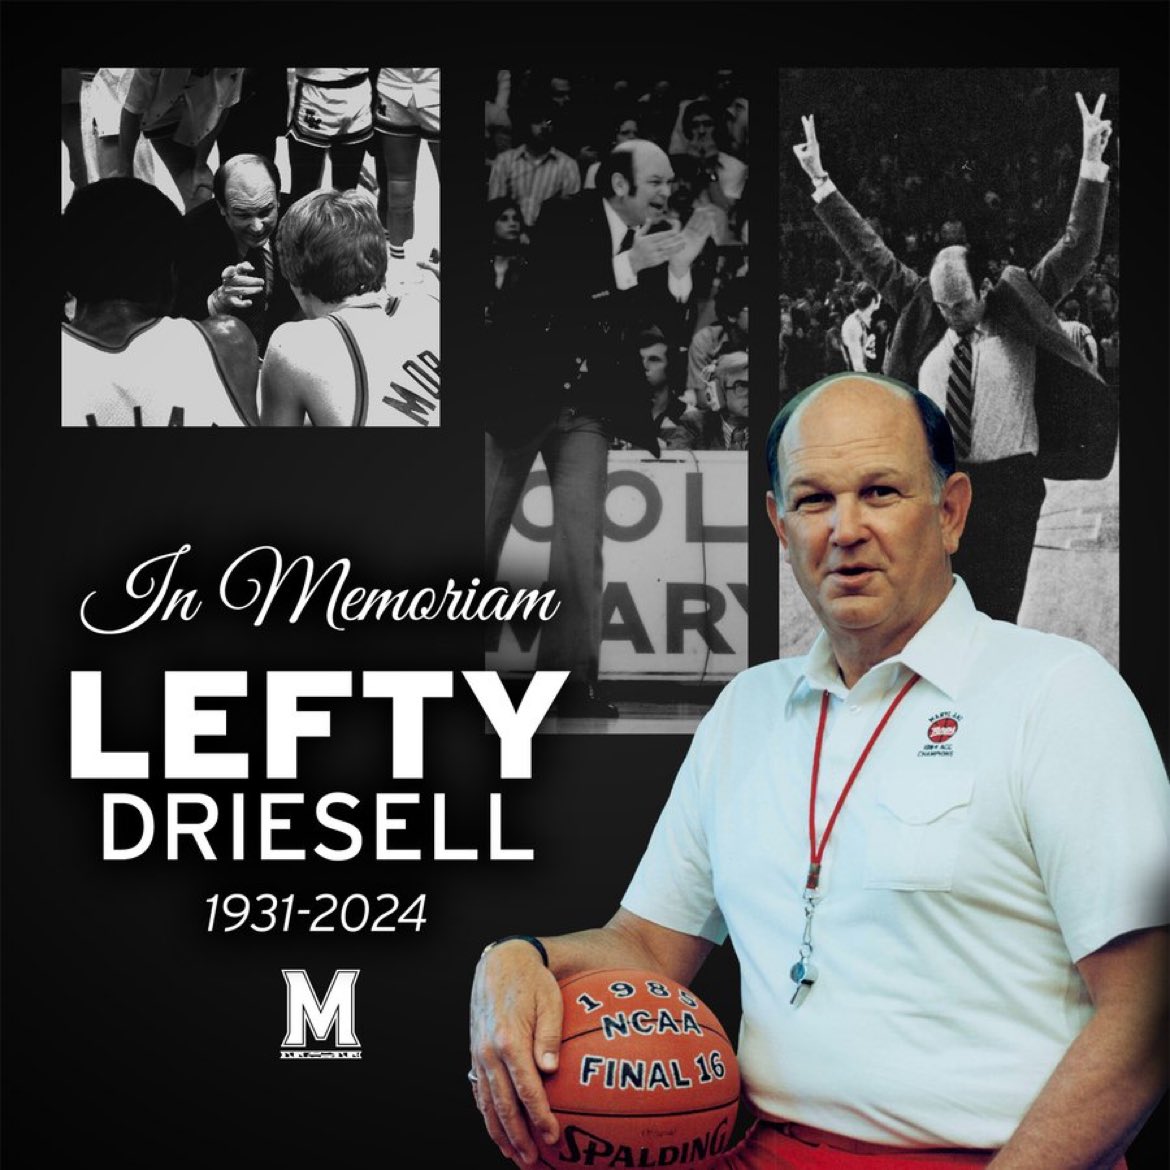 Lefty was an inspiration to me both as a coaching legend, but also as someone who grew up a Maryland fan. My thoughts and prayers are with his entire family. He’ll truly be missed.